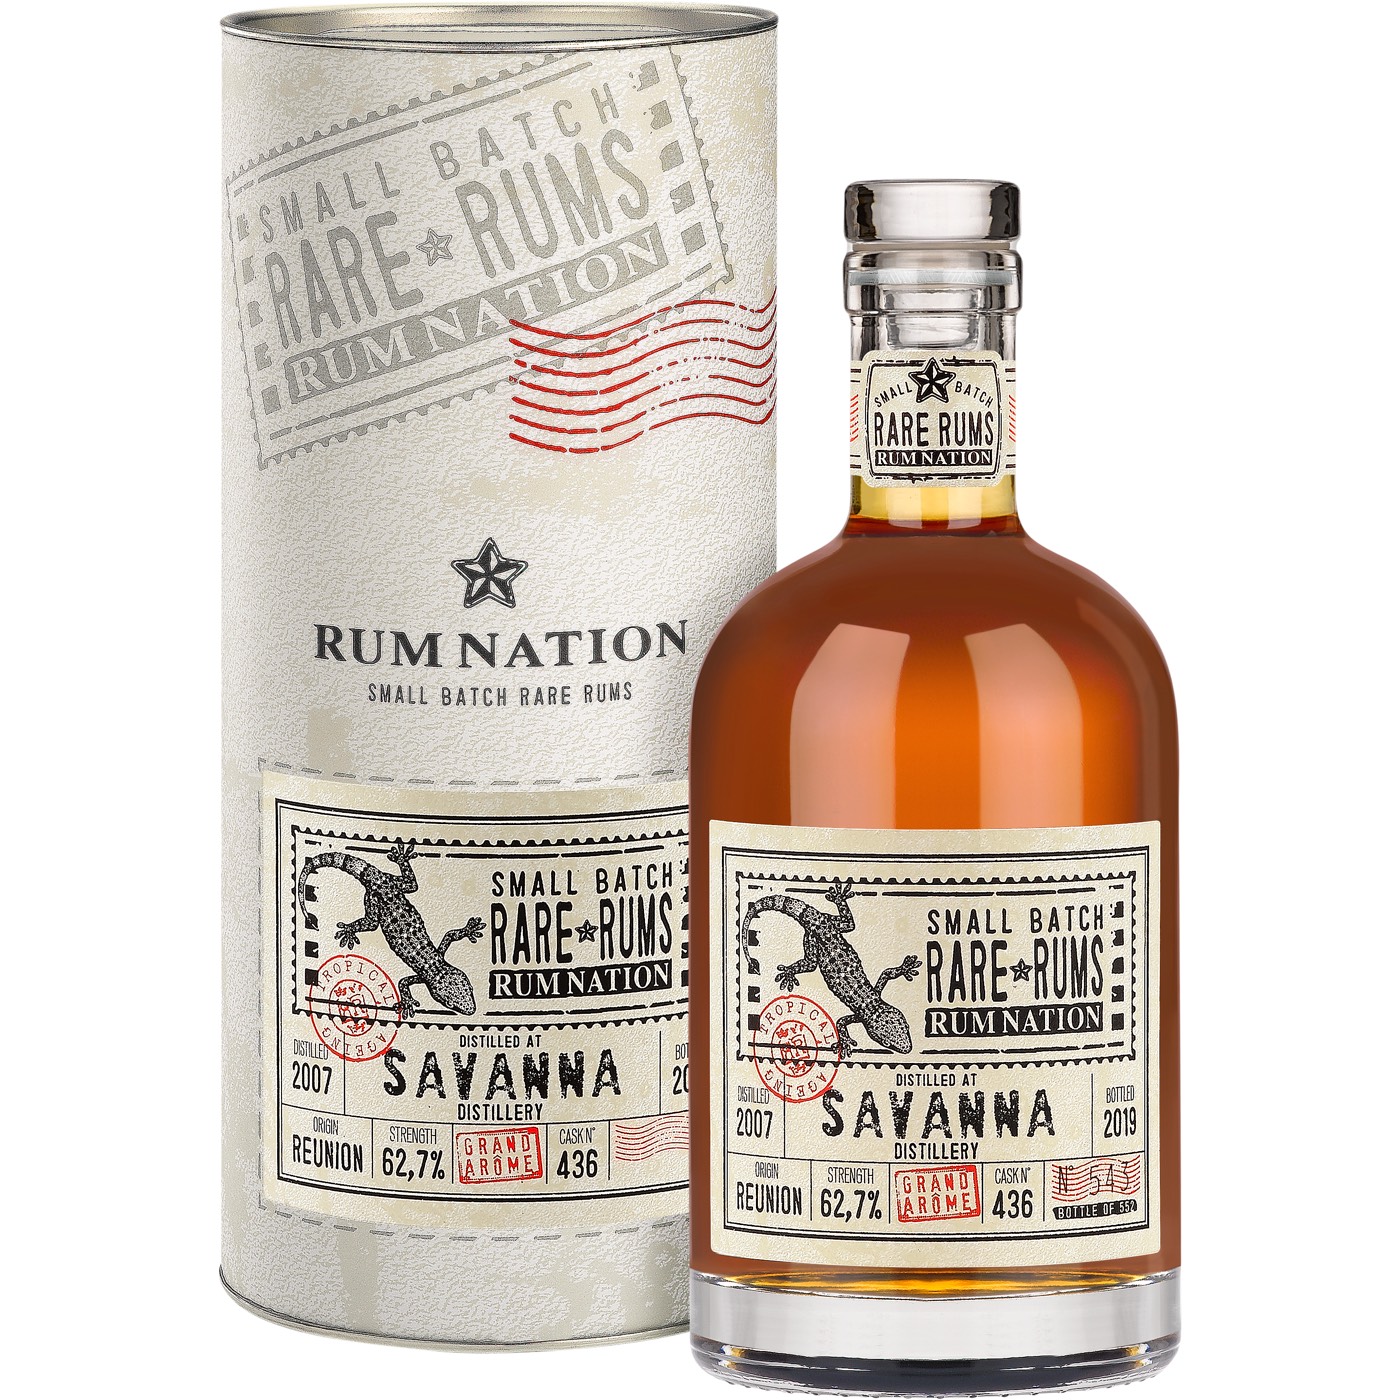 Bottle image of Small Batch Rare Rums